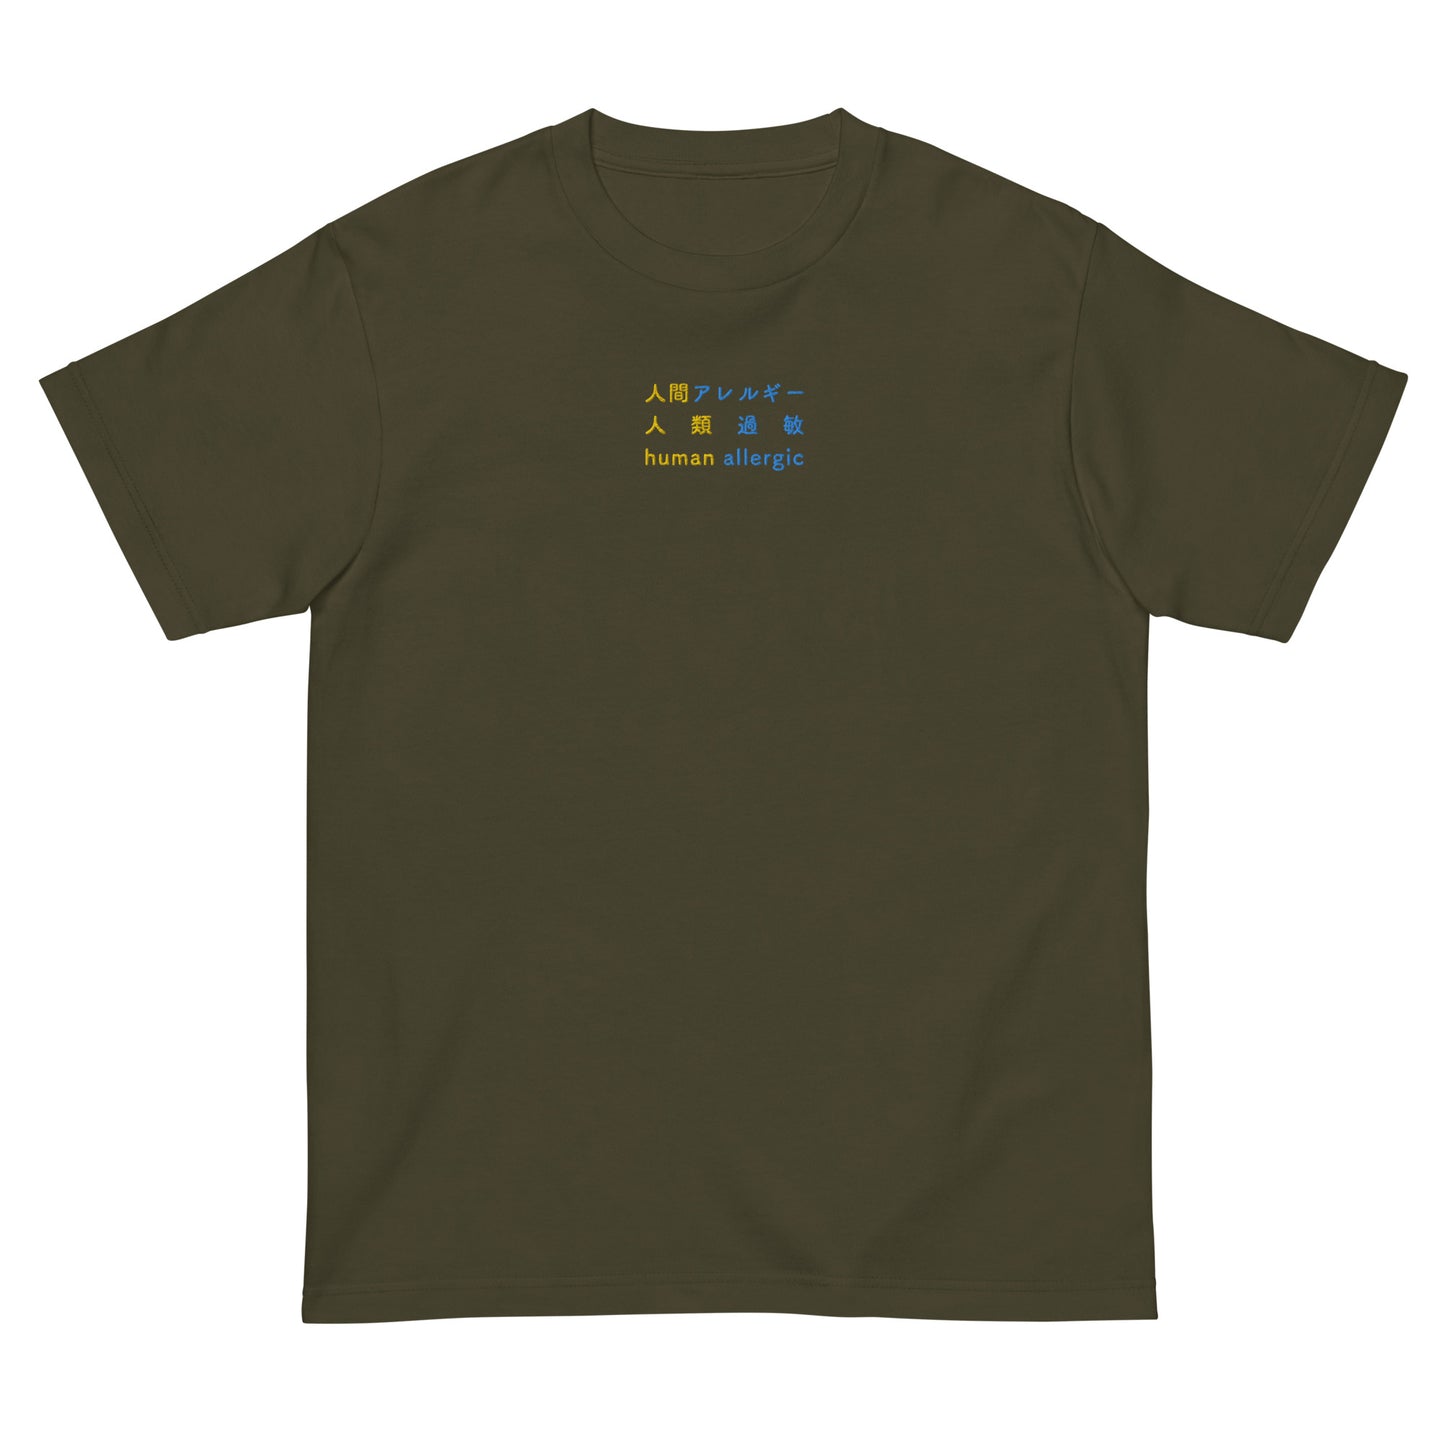 Green High Quality Tee - Front Design with an Yellow, Blue Embroidery "Human Allergic" in Japanese,Chinese and English